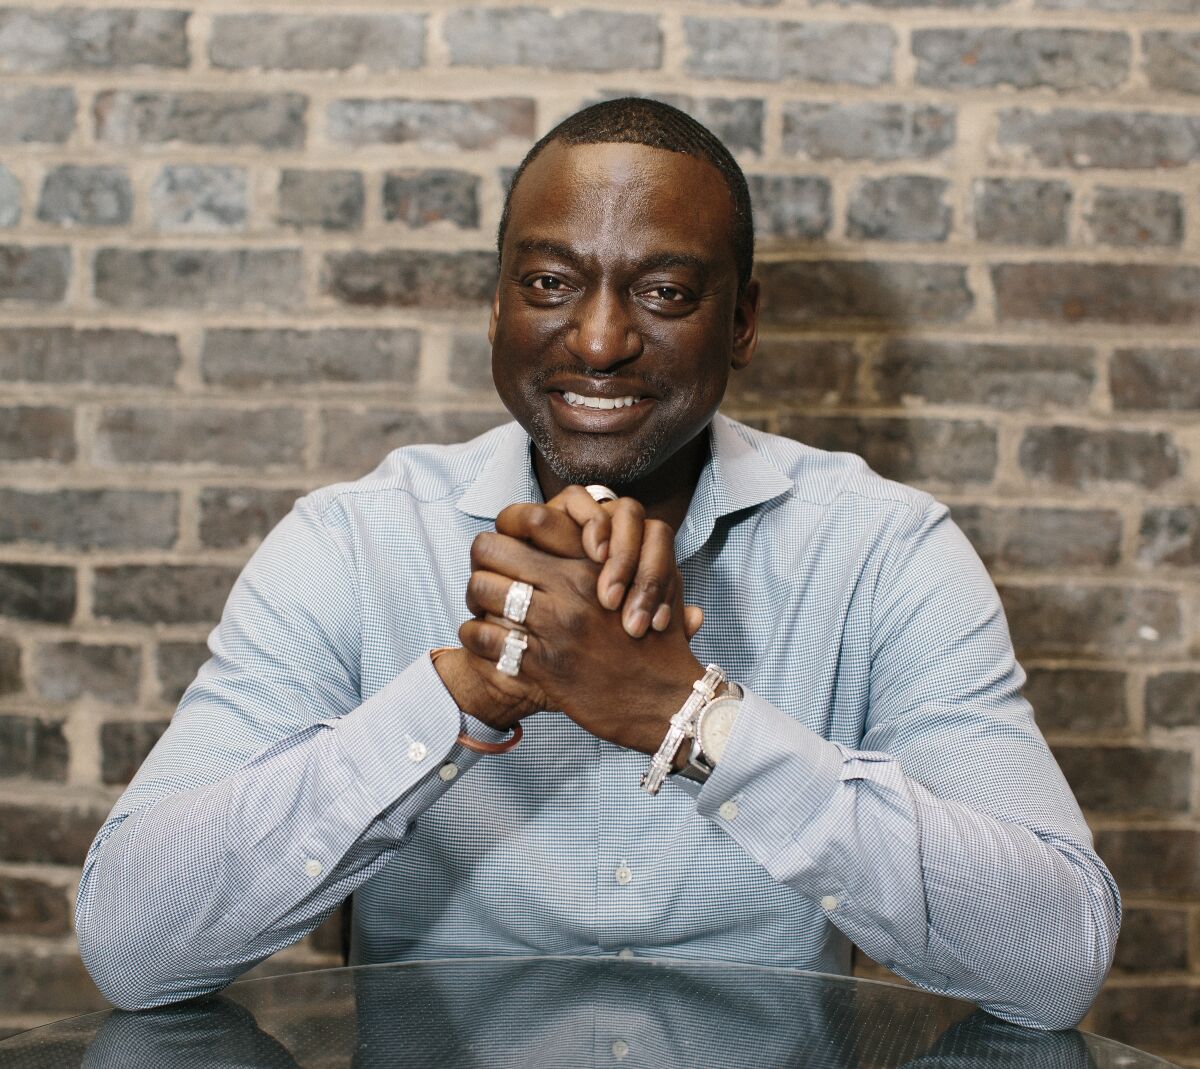 Yusef Salaam sits in front of a brick wall